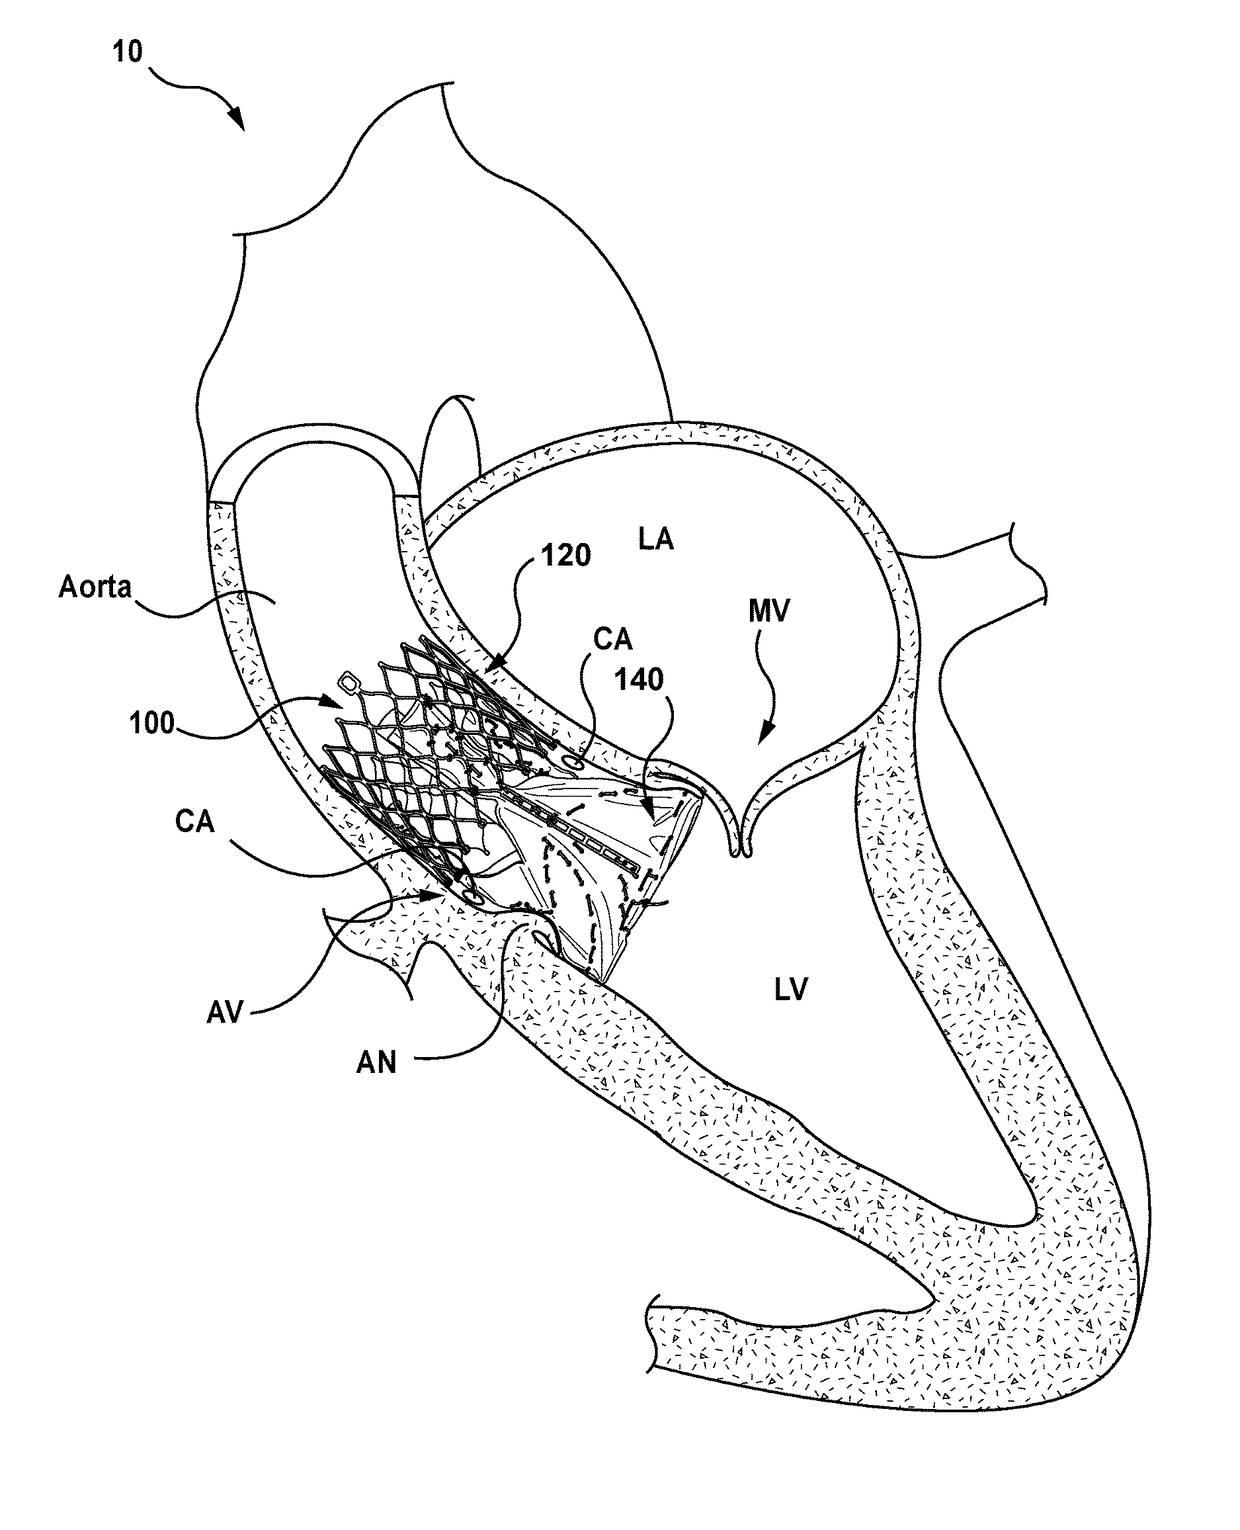 Transcatheter heart valve replacement systems, heart valve prostheses, and methods for percutaneous heart valve replacement